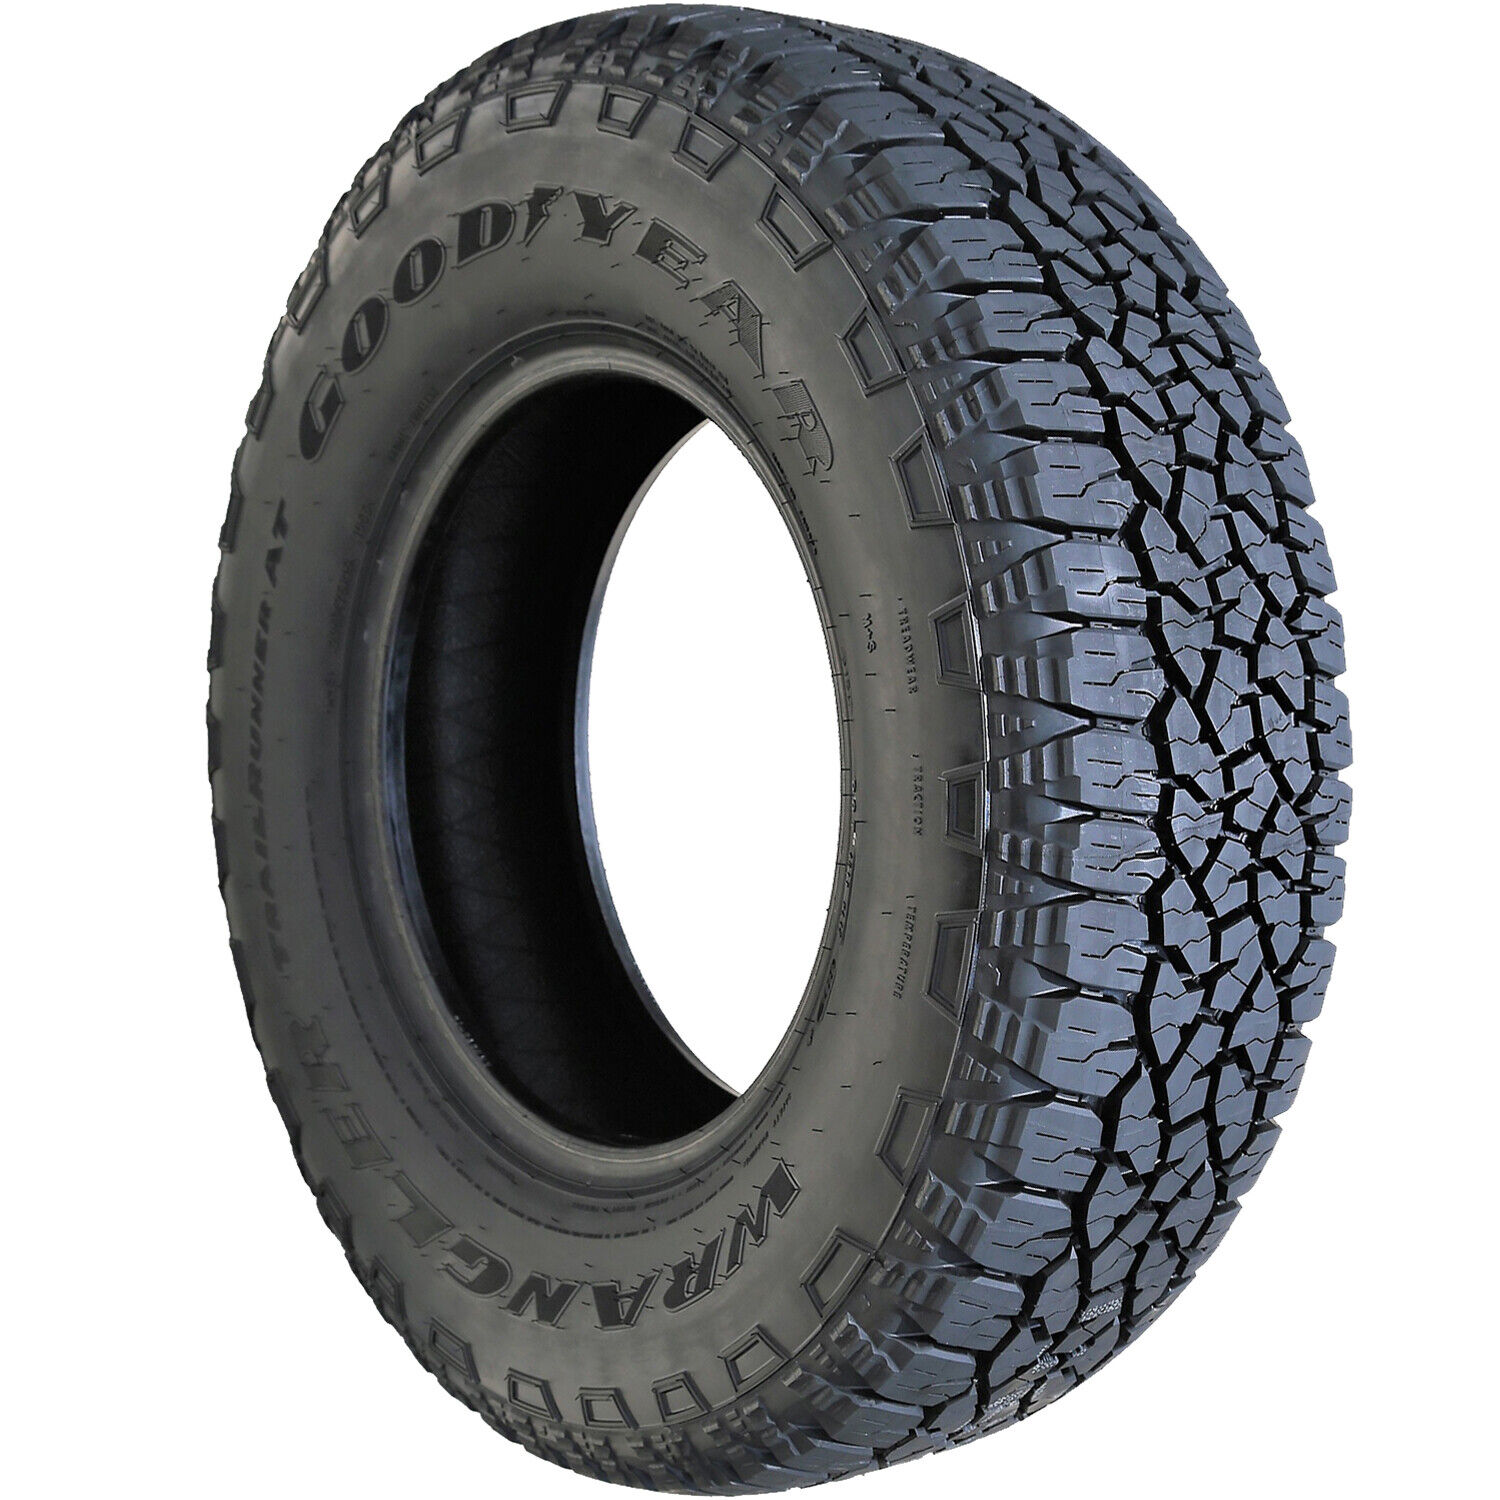 Need New Tires This Year. Discover the Goodyear Wrangler SR-A in 2023